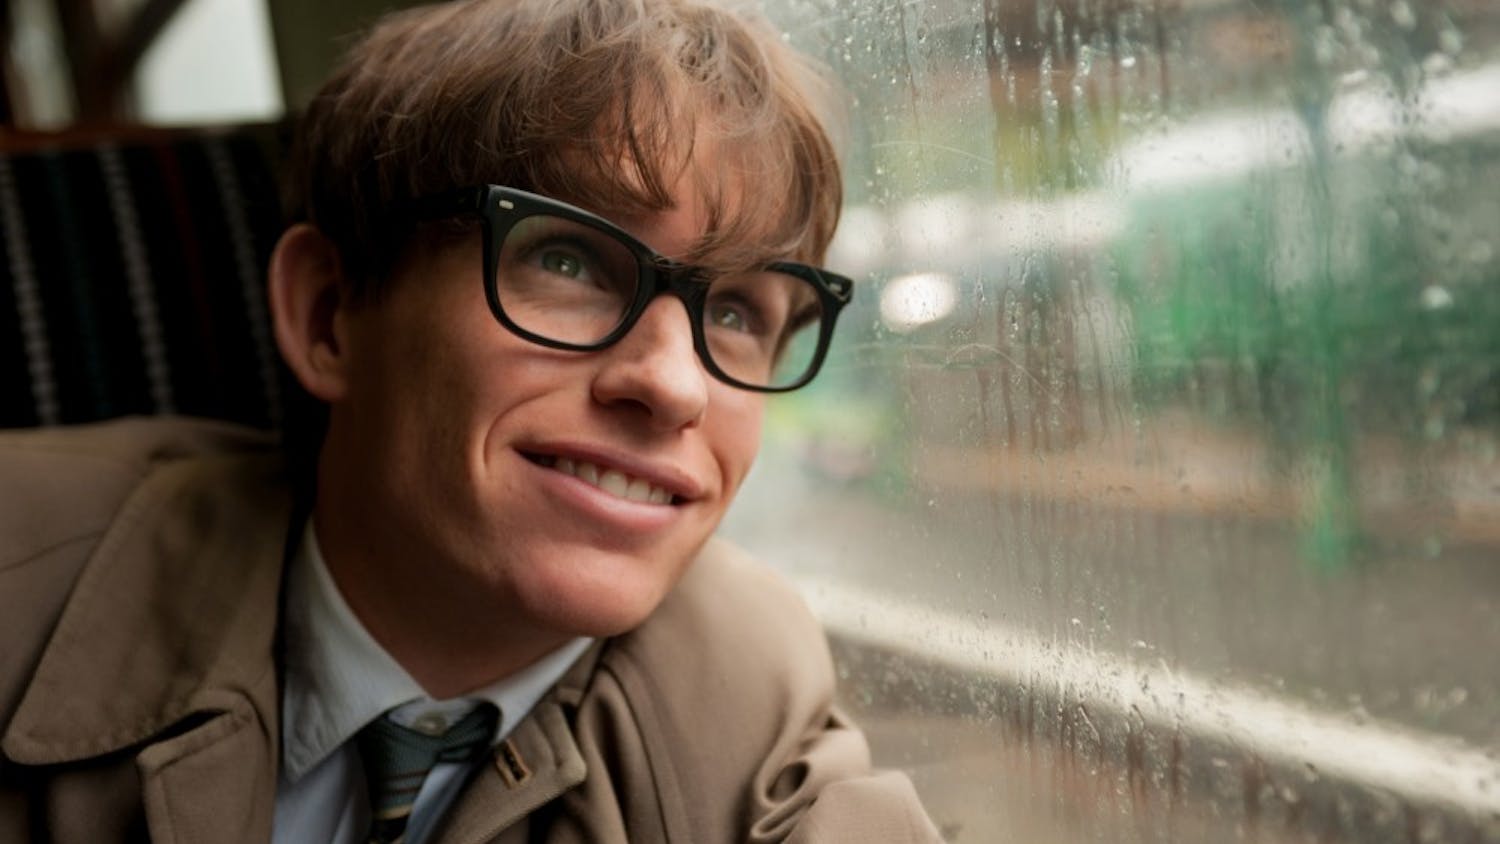 TTOE_D19_ 06191  Eddie Redmayne stars as Stephen Hawking in Academy Award winner James Marsh’s THE THEORY OF EVERYTHING, a Focus Features release.

Photo Credit:  Liam Daniel / Focus Features
